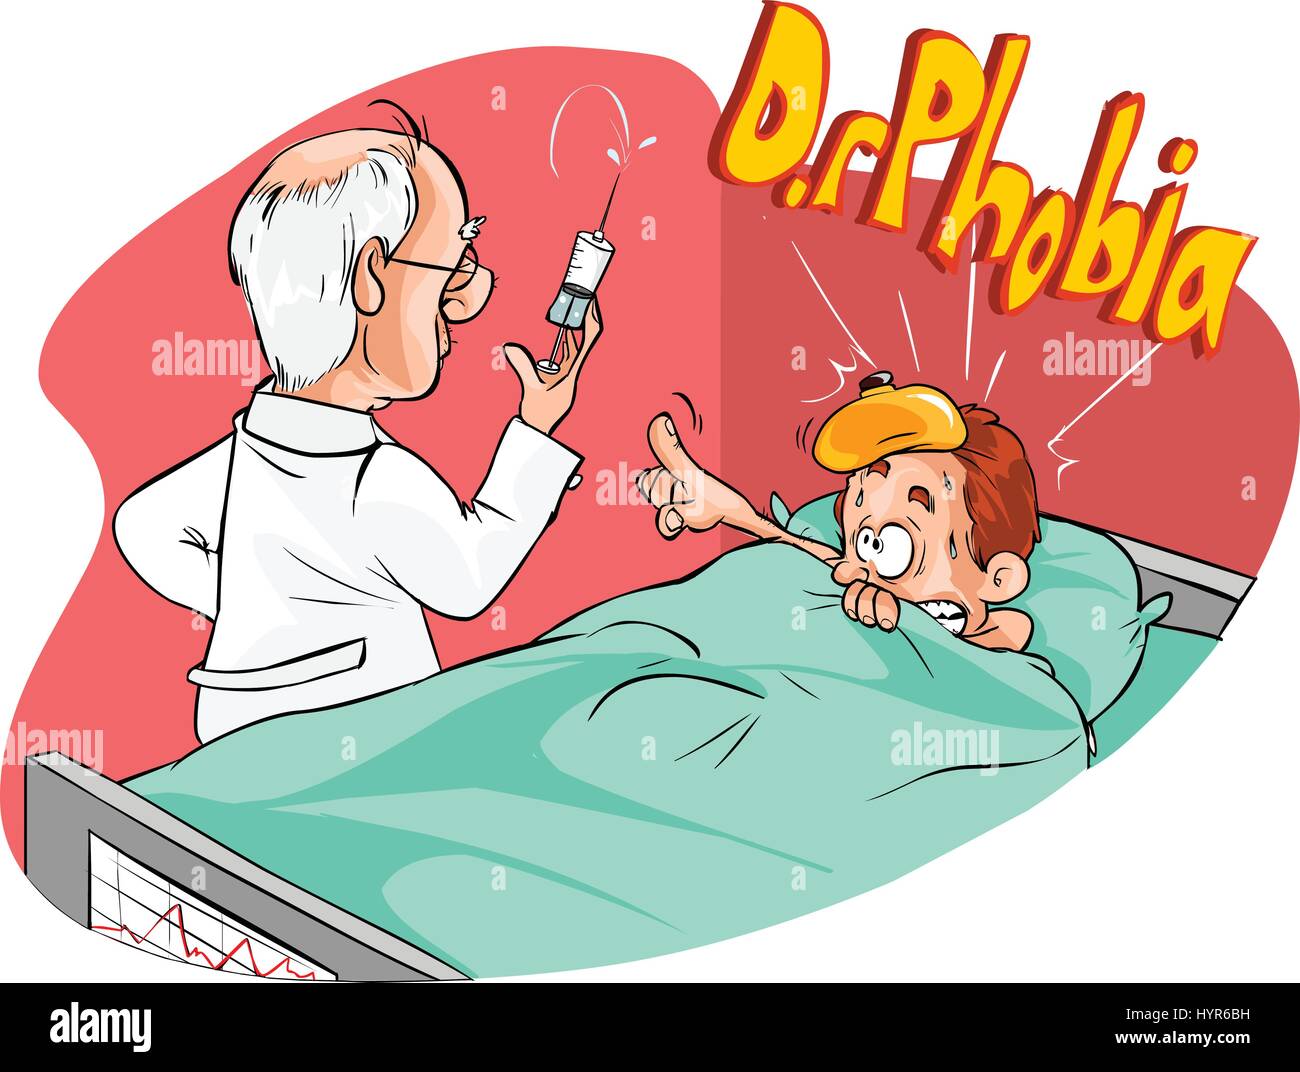 Vector illustration of a Doctor giving an injection Stock Vector